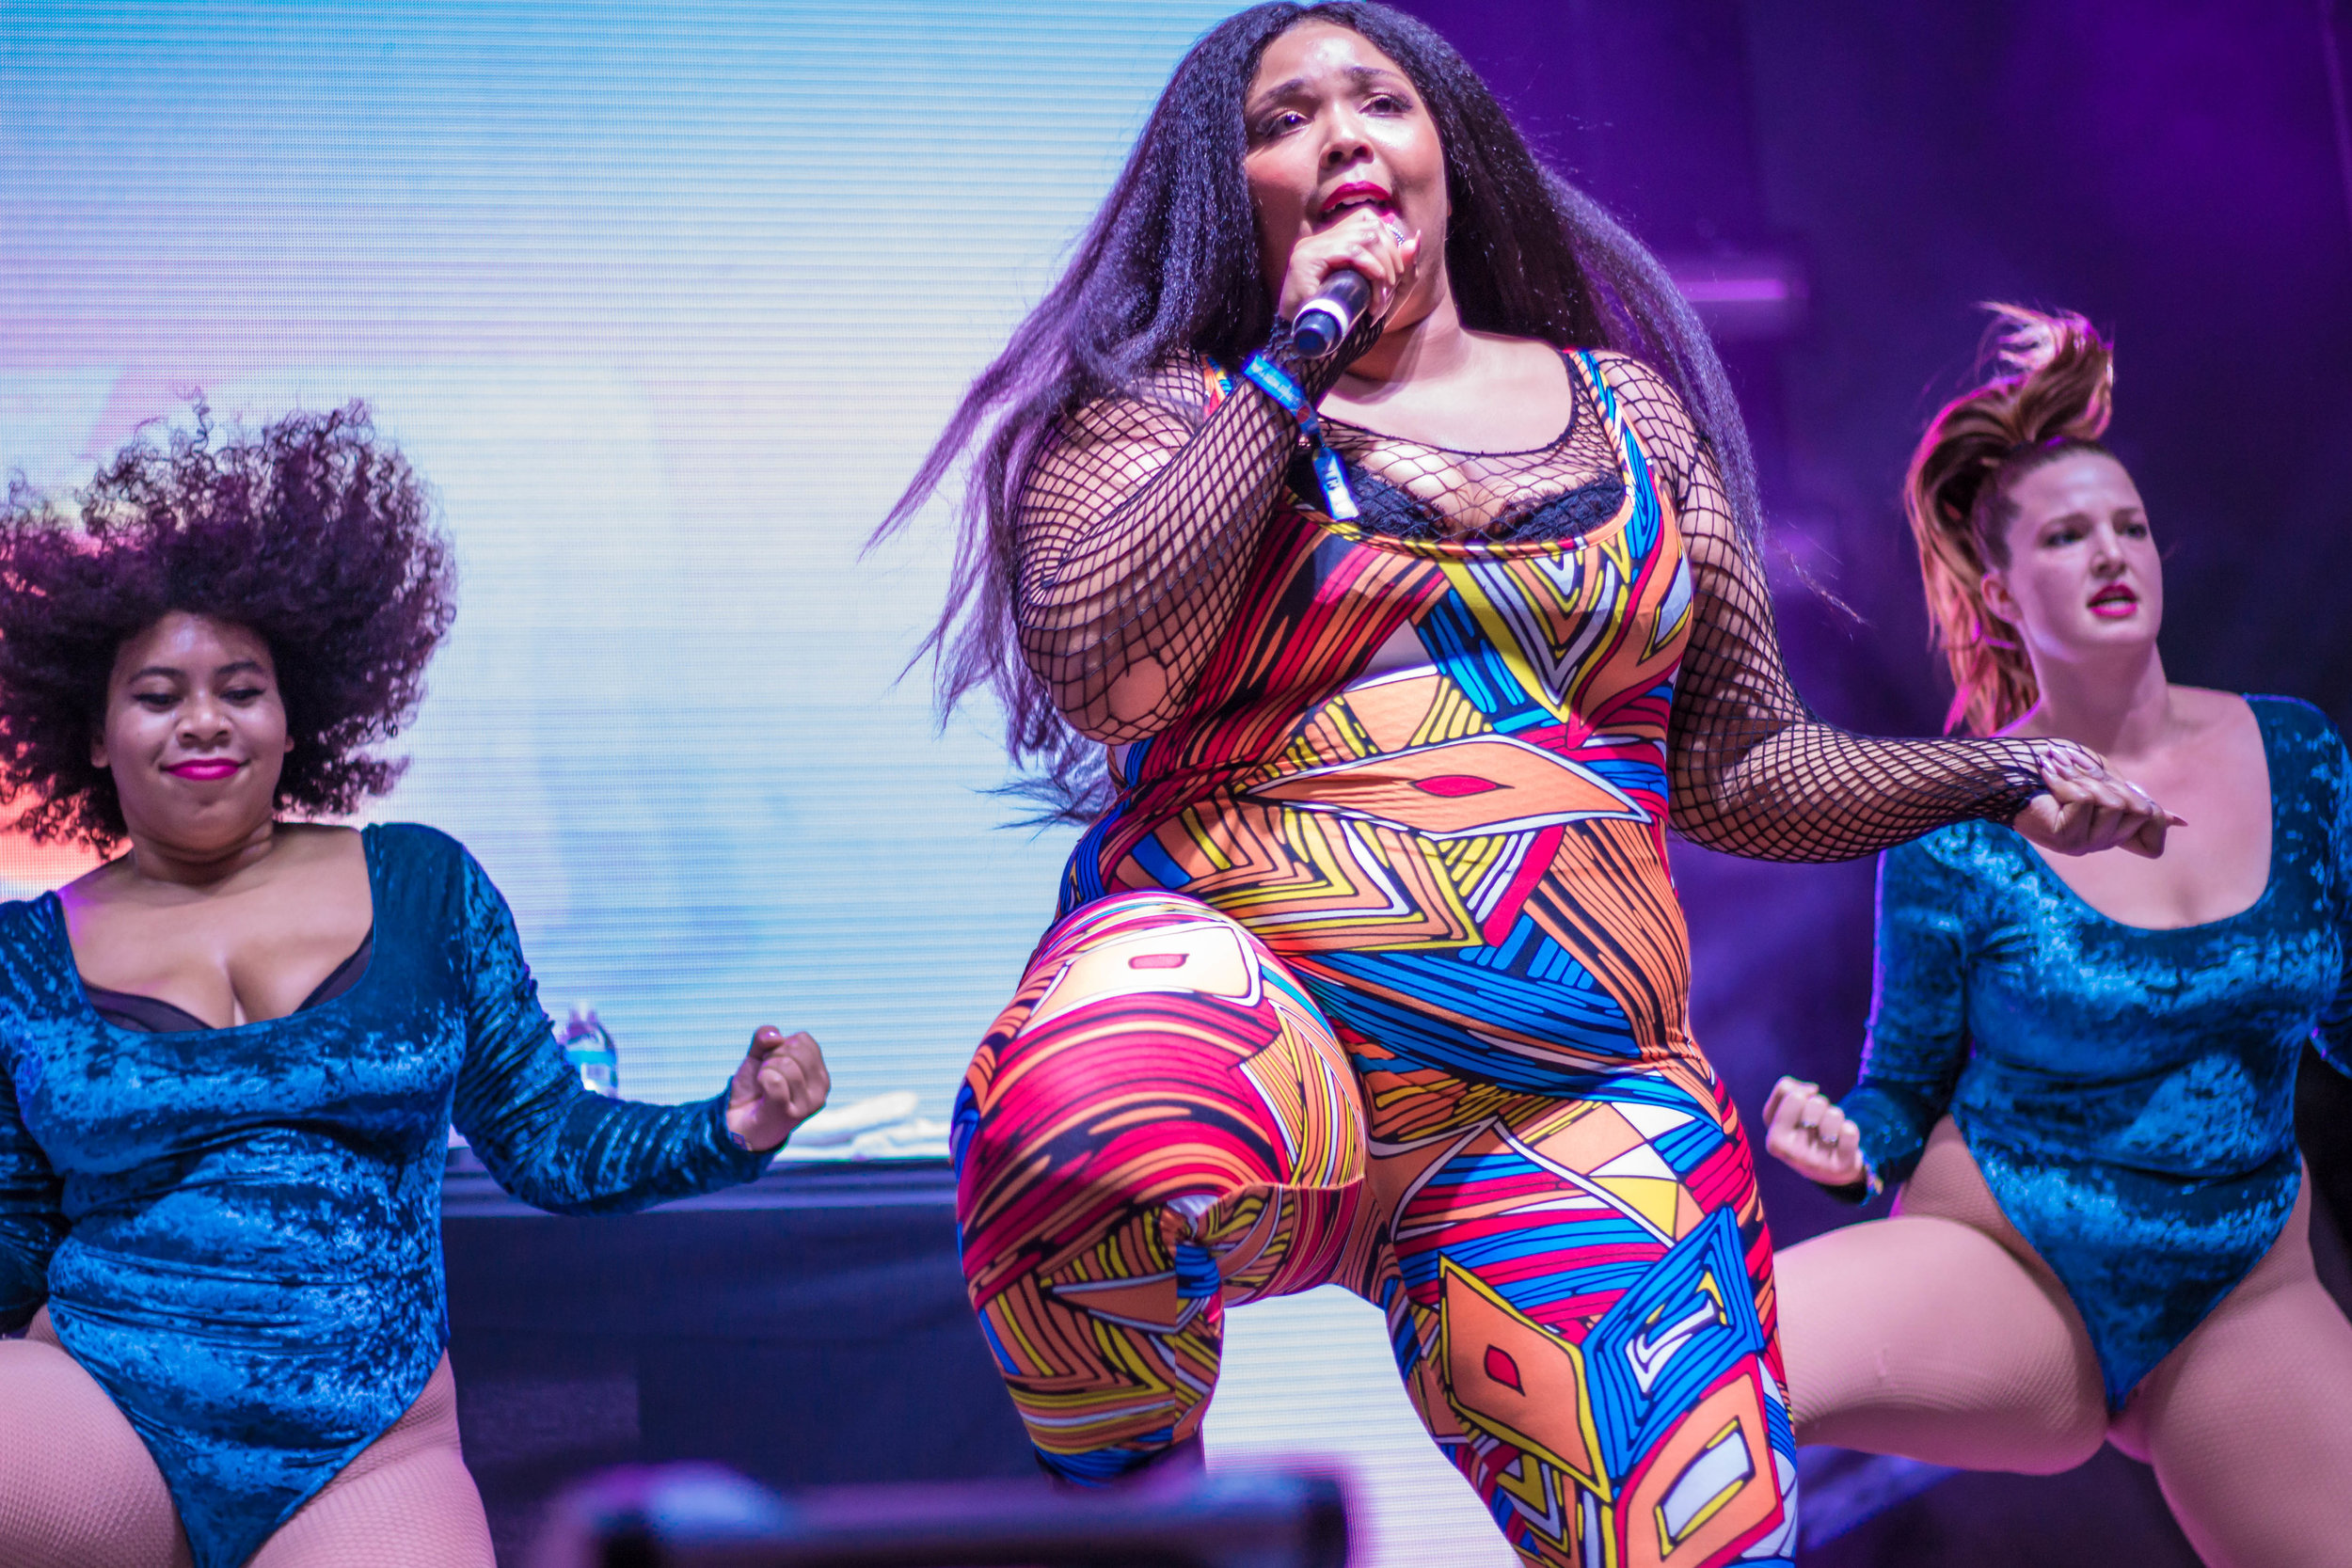 Check out the full gallery featuring Noname, Lizzo, SuperDuperKyle, Campdog...